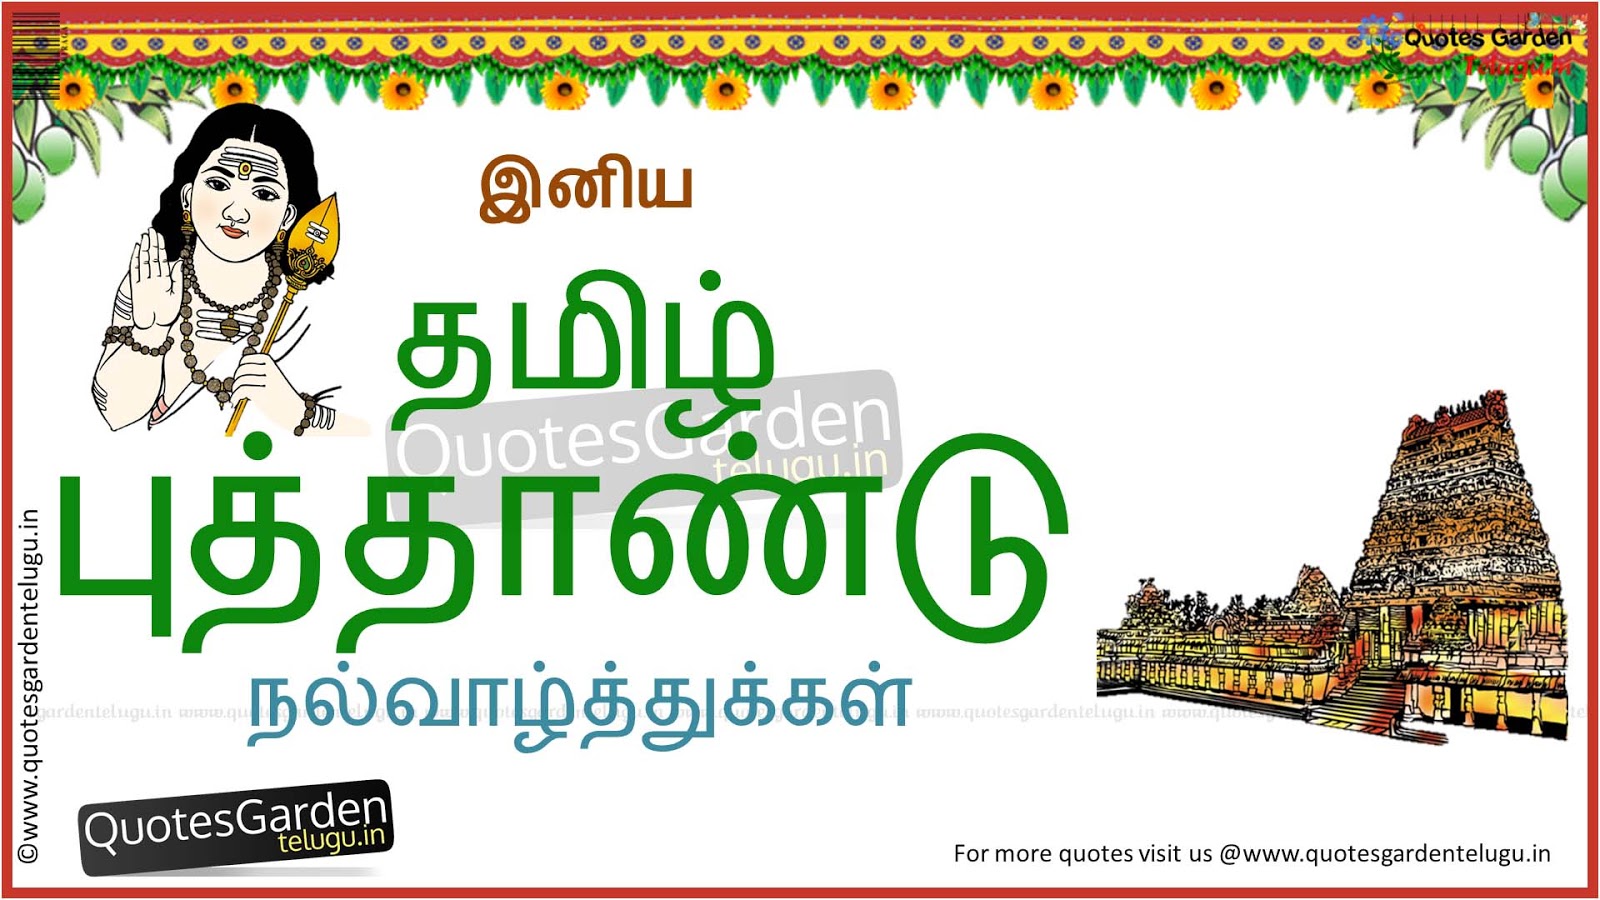 Tamil New Year Image Wallpapers